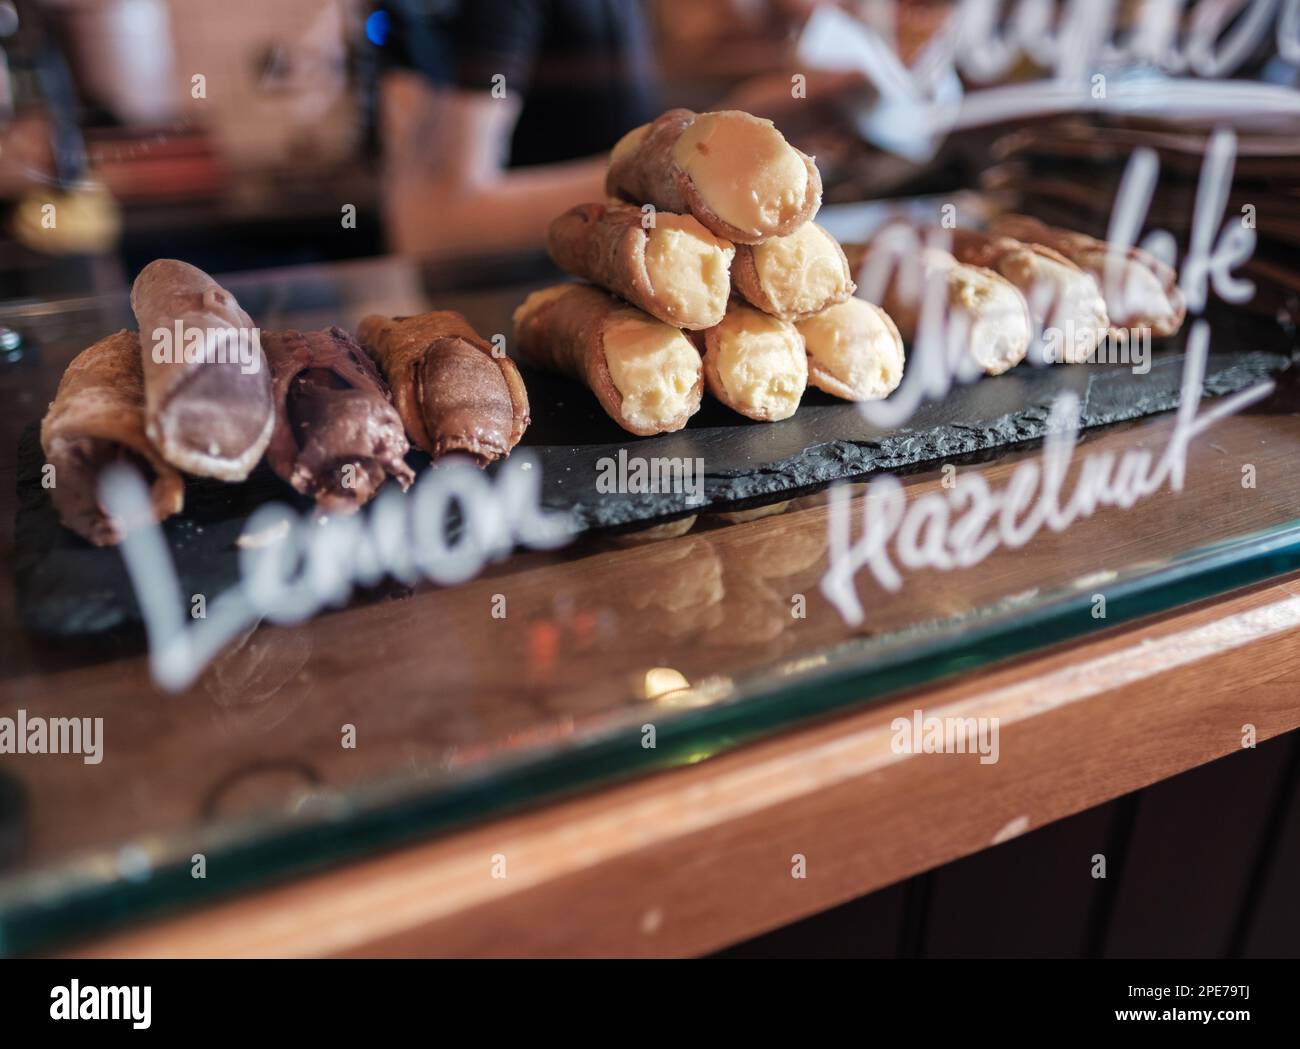 Delicious Cannoli Pastries For Sale In A trendy Cafe, Deli Or Bakery Stock Photo